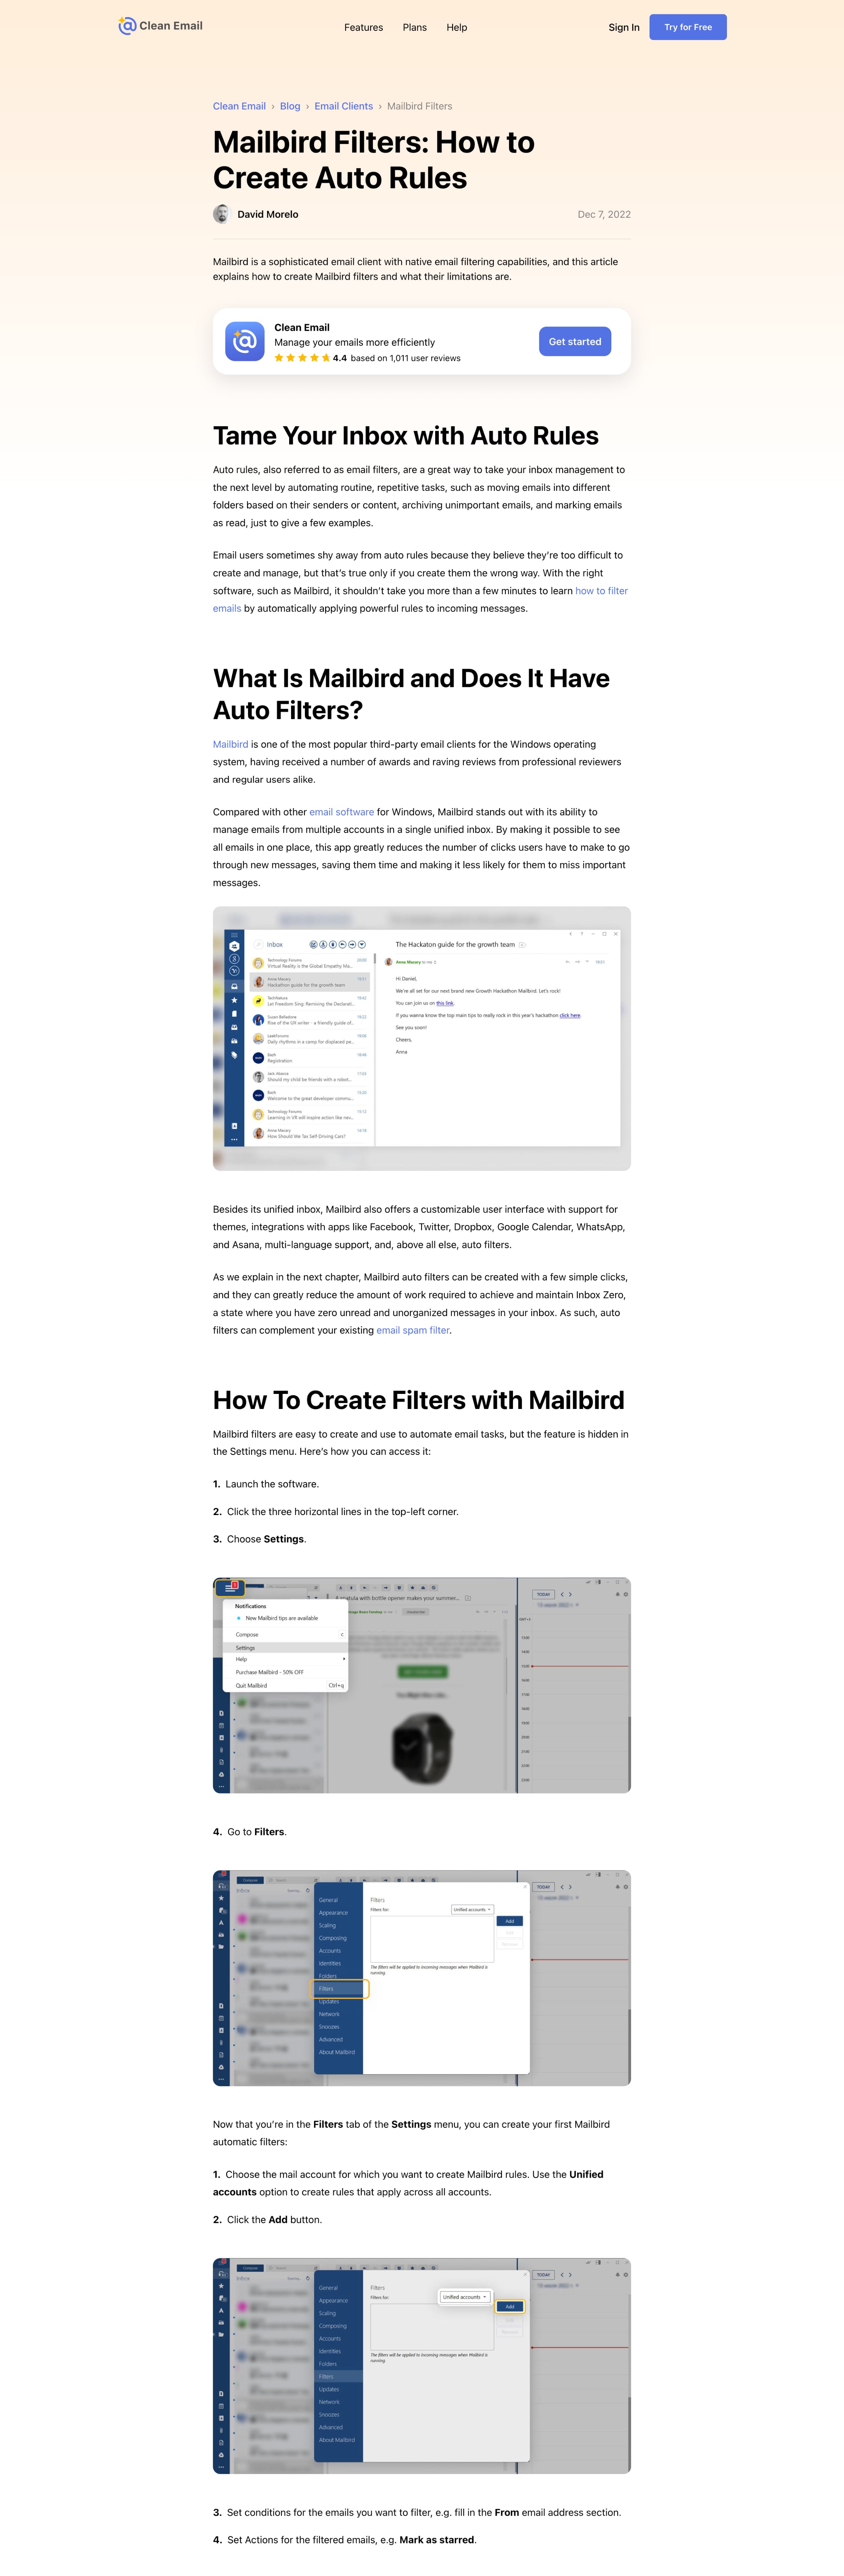 Mailbird Filters: How to Create Auto Rules
